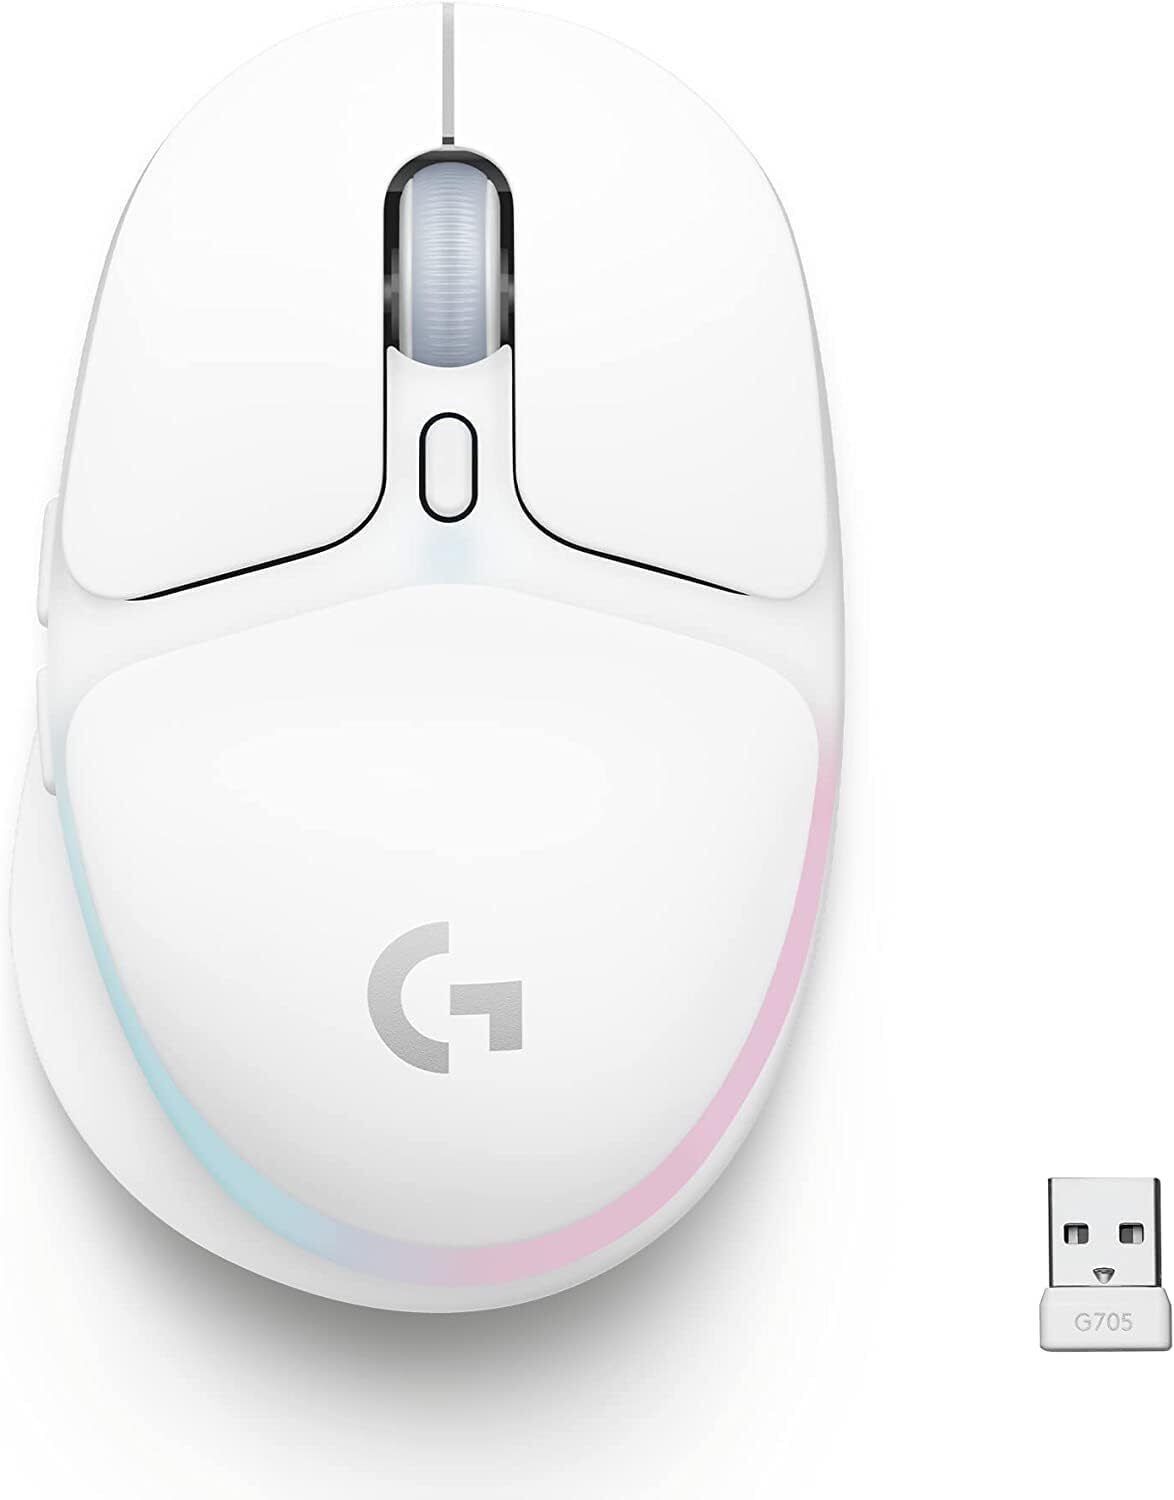 Logitech G705 Wireless Gaming Mouse, Bluetooth Connection - White Mist